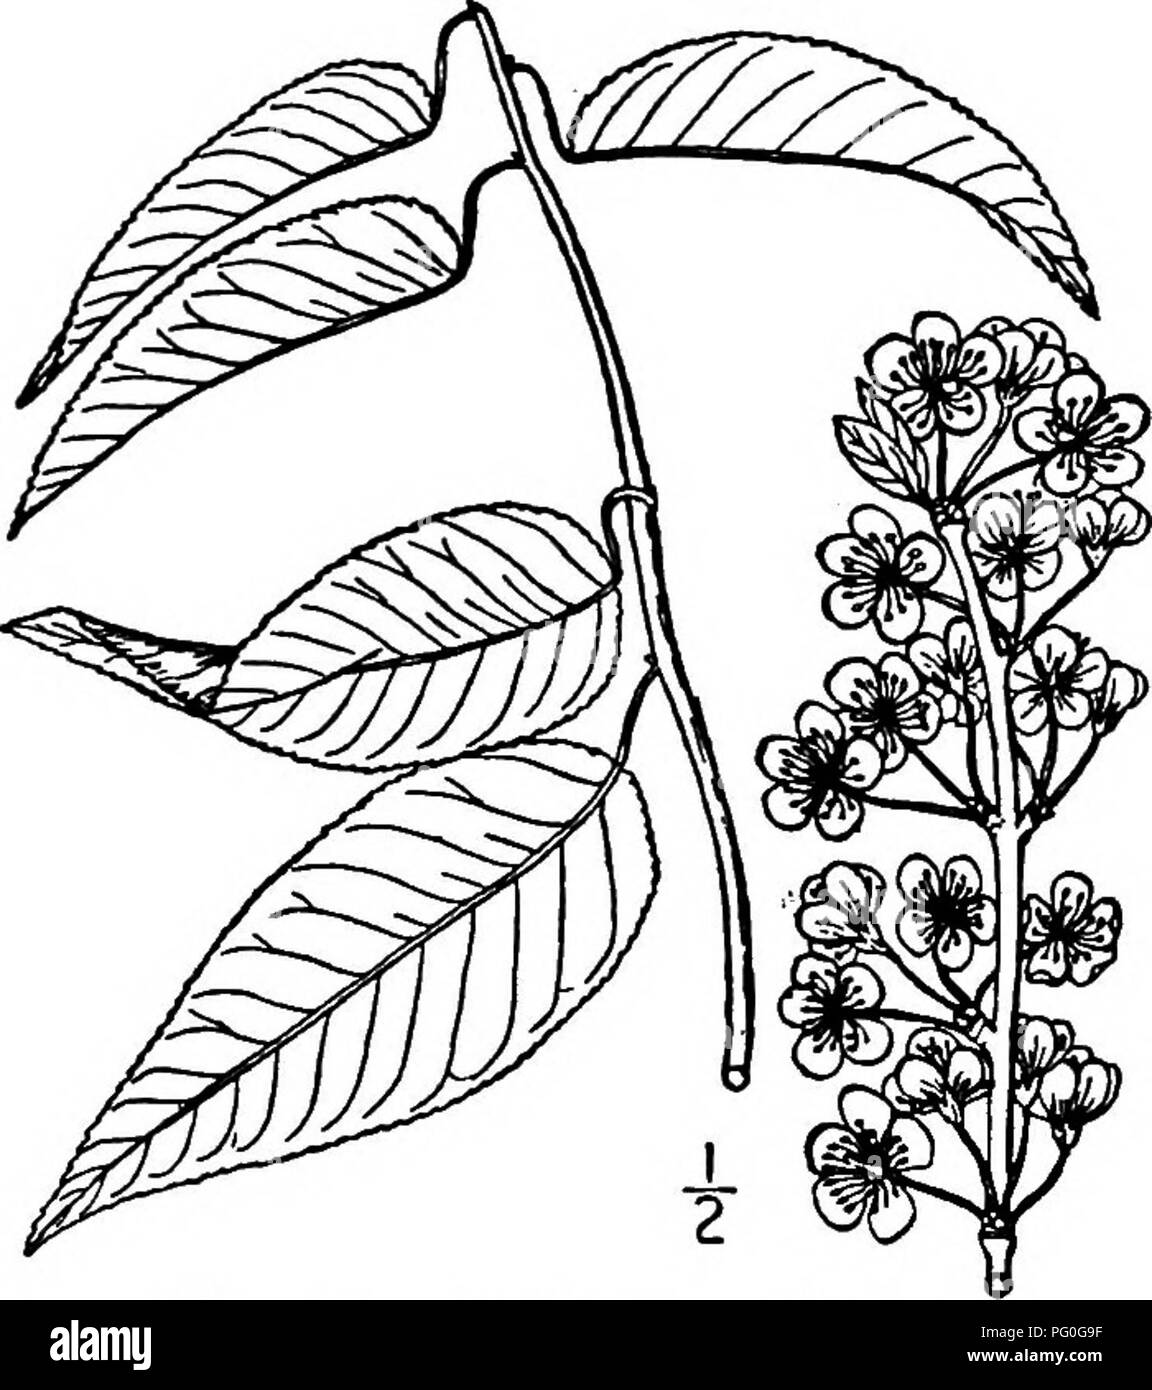 . North American trees : being descriptions and illustrations of the trees growing independently of cultivation in North America, north of Mexico and the West Indies . Trees. 494 The Plums and Cherries. Fig. 452. — Wild Goose Plum. 4-flowered umbels on slender, roughish pedicels; the calyx-tube is obconic, the lobes ovate, blunt or pointed, glandular- toothed, hairy on both surfaces; the petals are obovate, seldom notched. The fruit ripens in September or October, is nearly globular, 2 to 2.5 cm. long, bright red; its skin is thick, the flesh thin, hard, and acid; the stone is oval, somewhat s Stock Photo